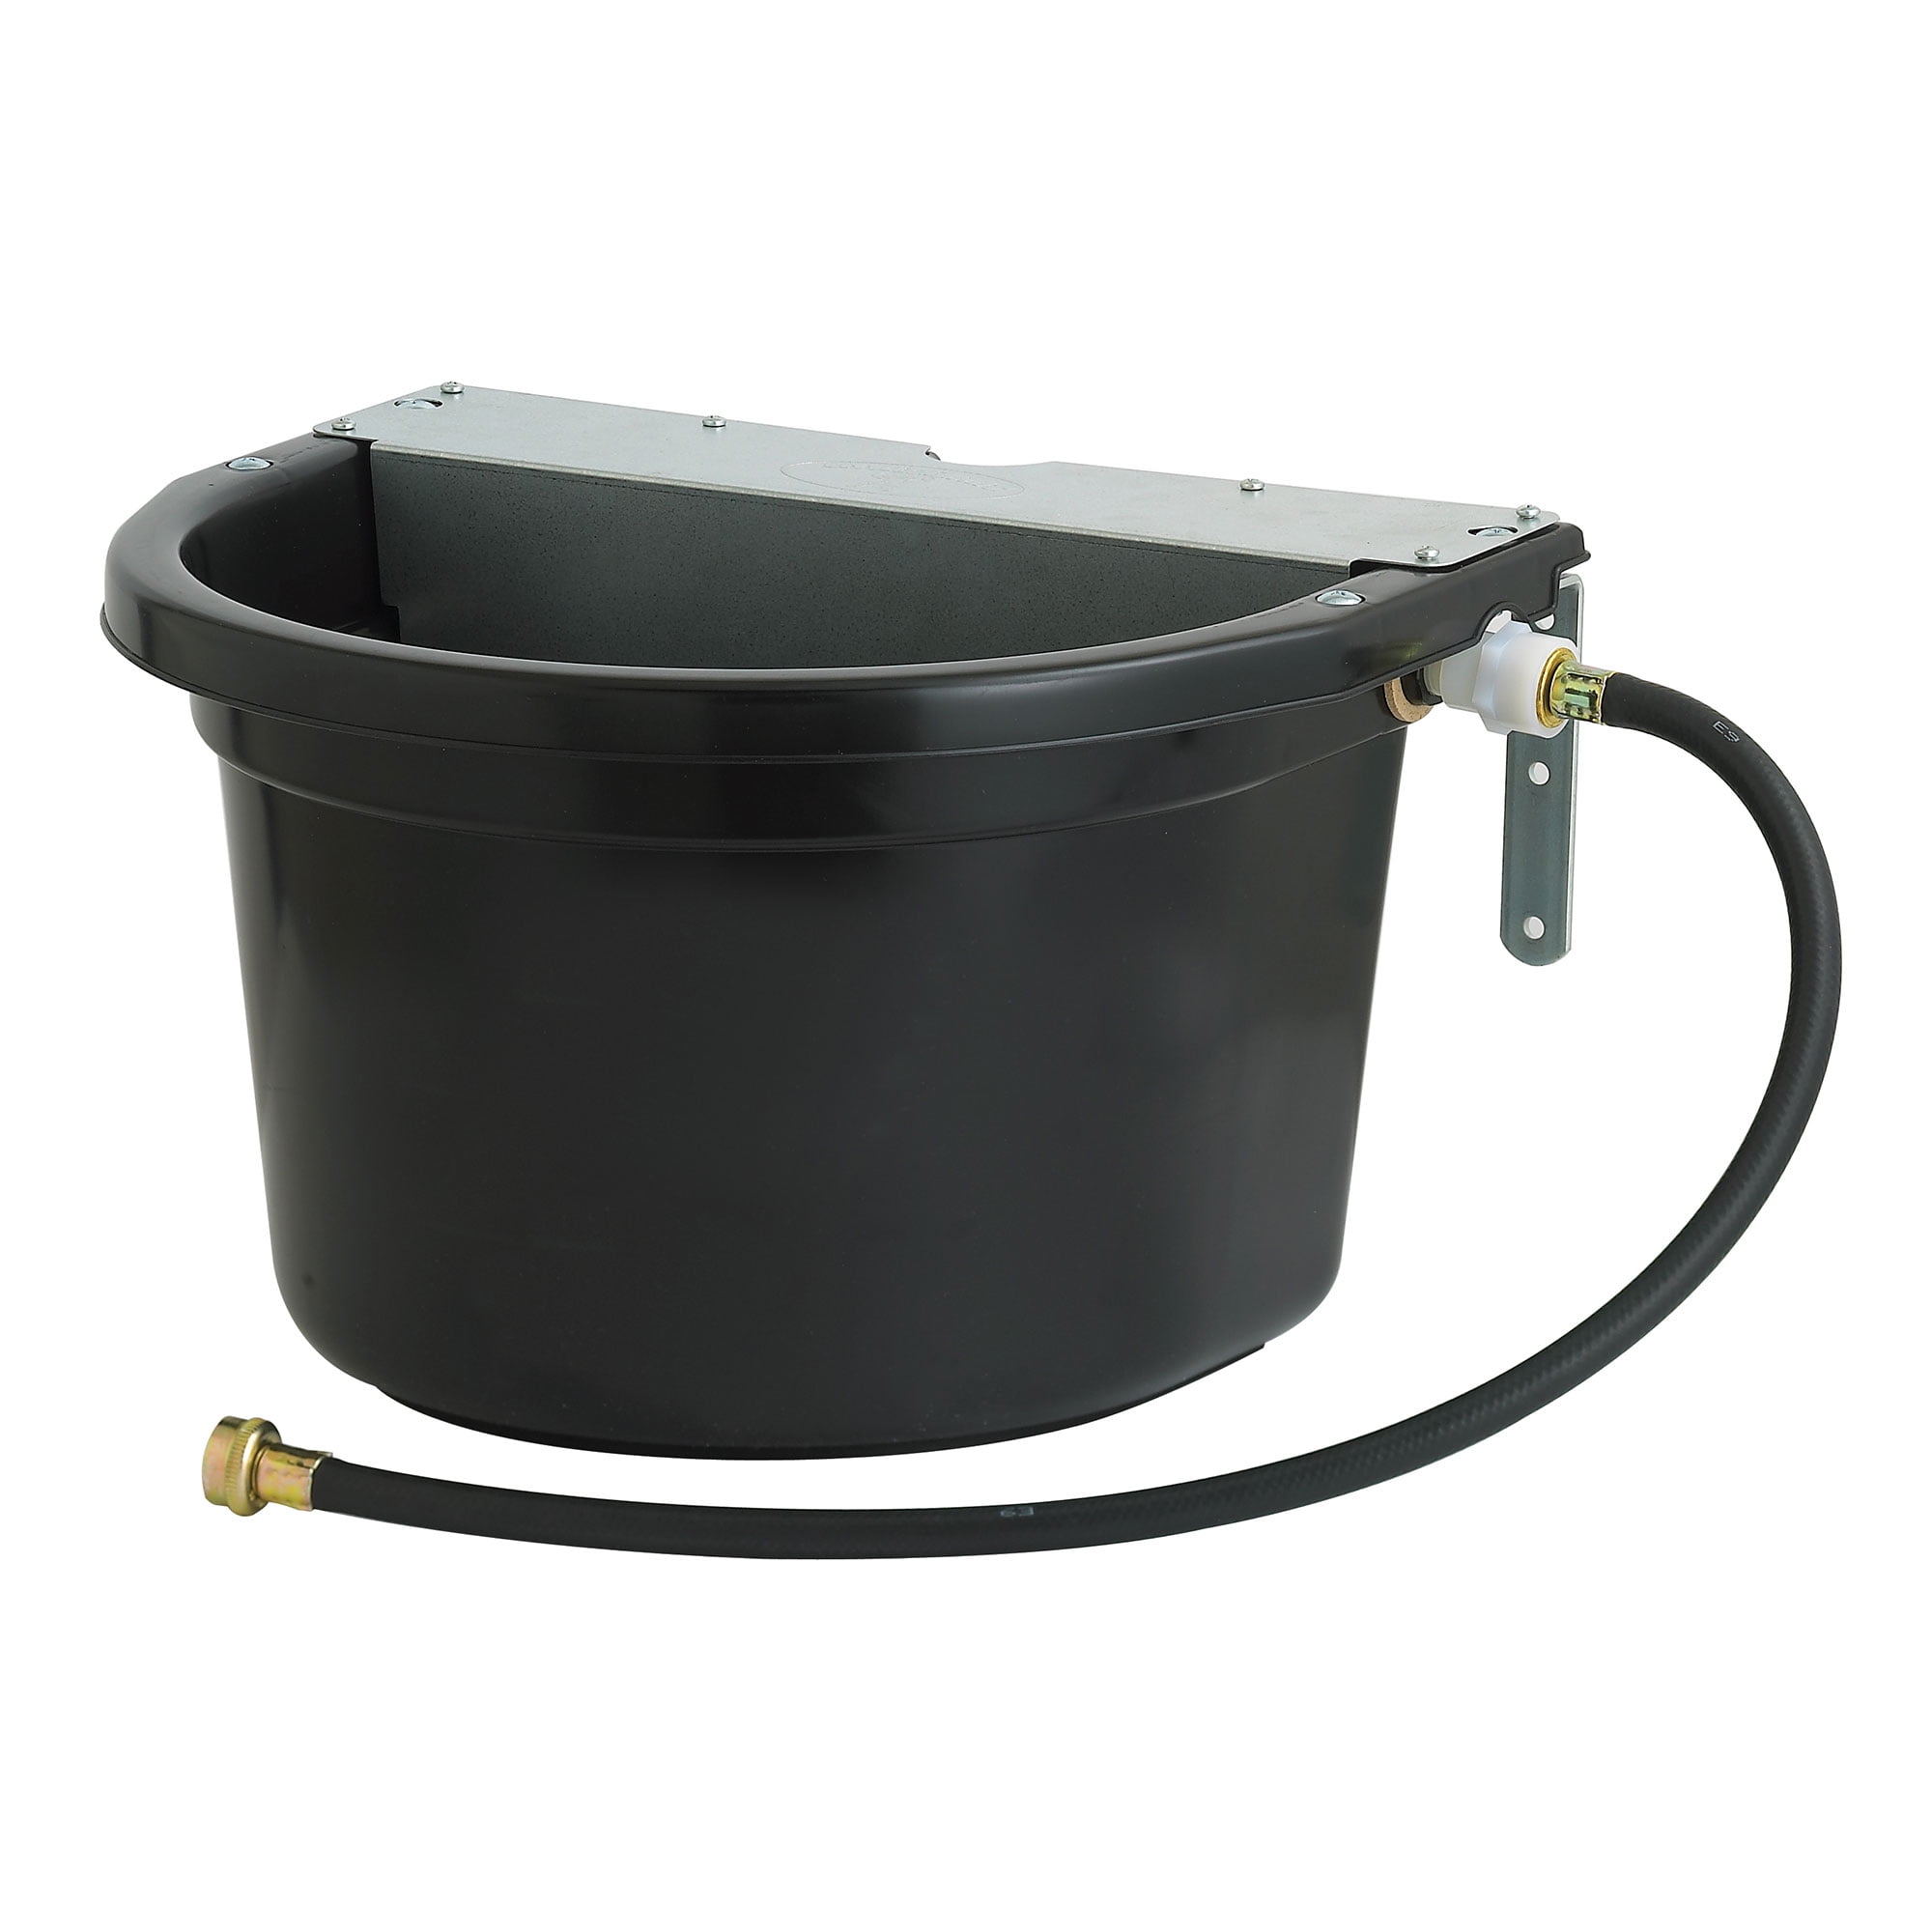 Fortiflex 17.5 gal. Large Capacity Plastic Bucket at Tractor Supply Co.